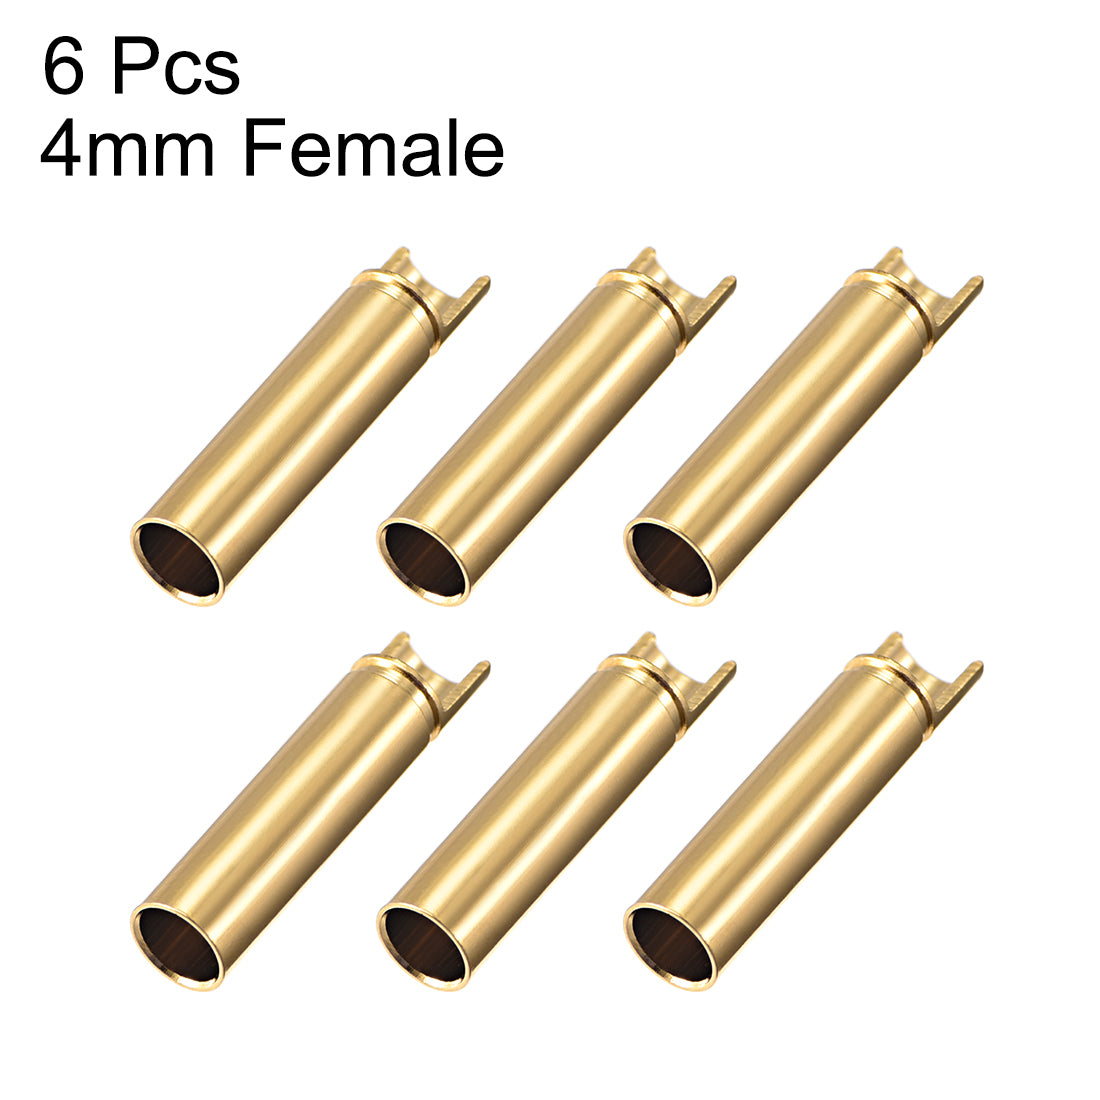 uxcell Uxcell 4 mm Bullet Connector Gold Plated Banana Plugs Female 6pcs